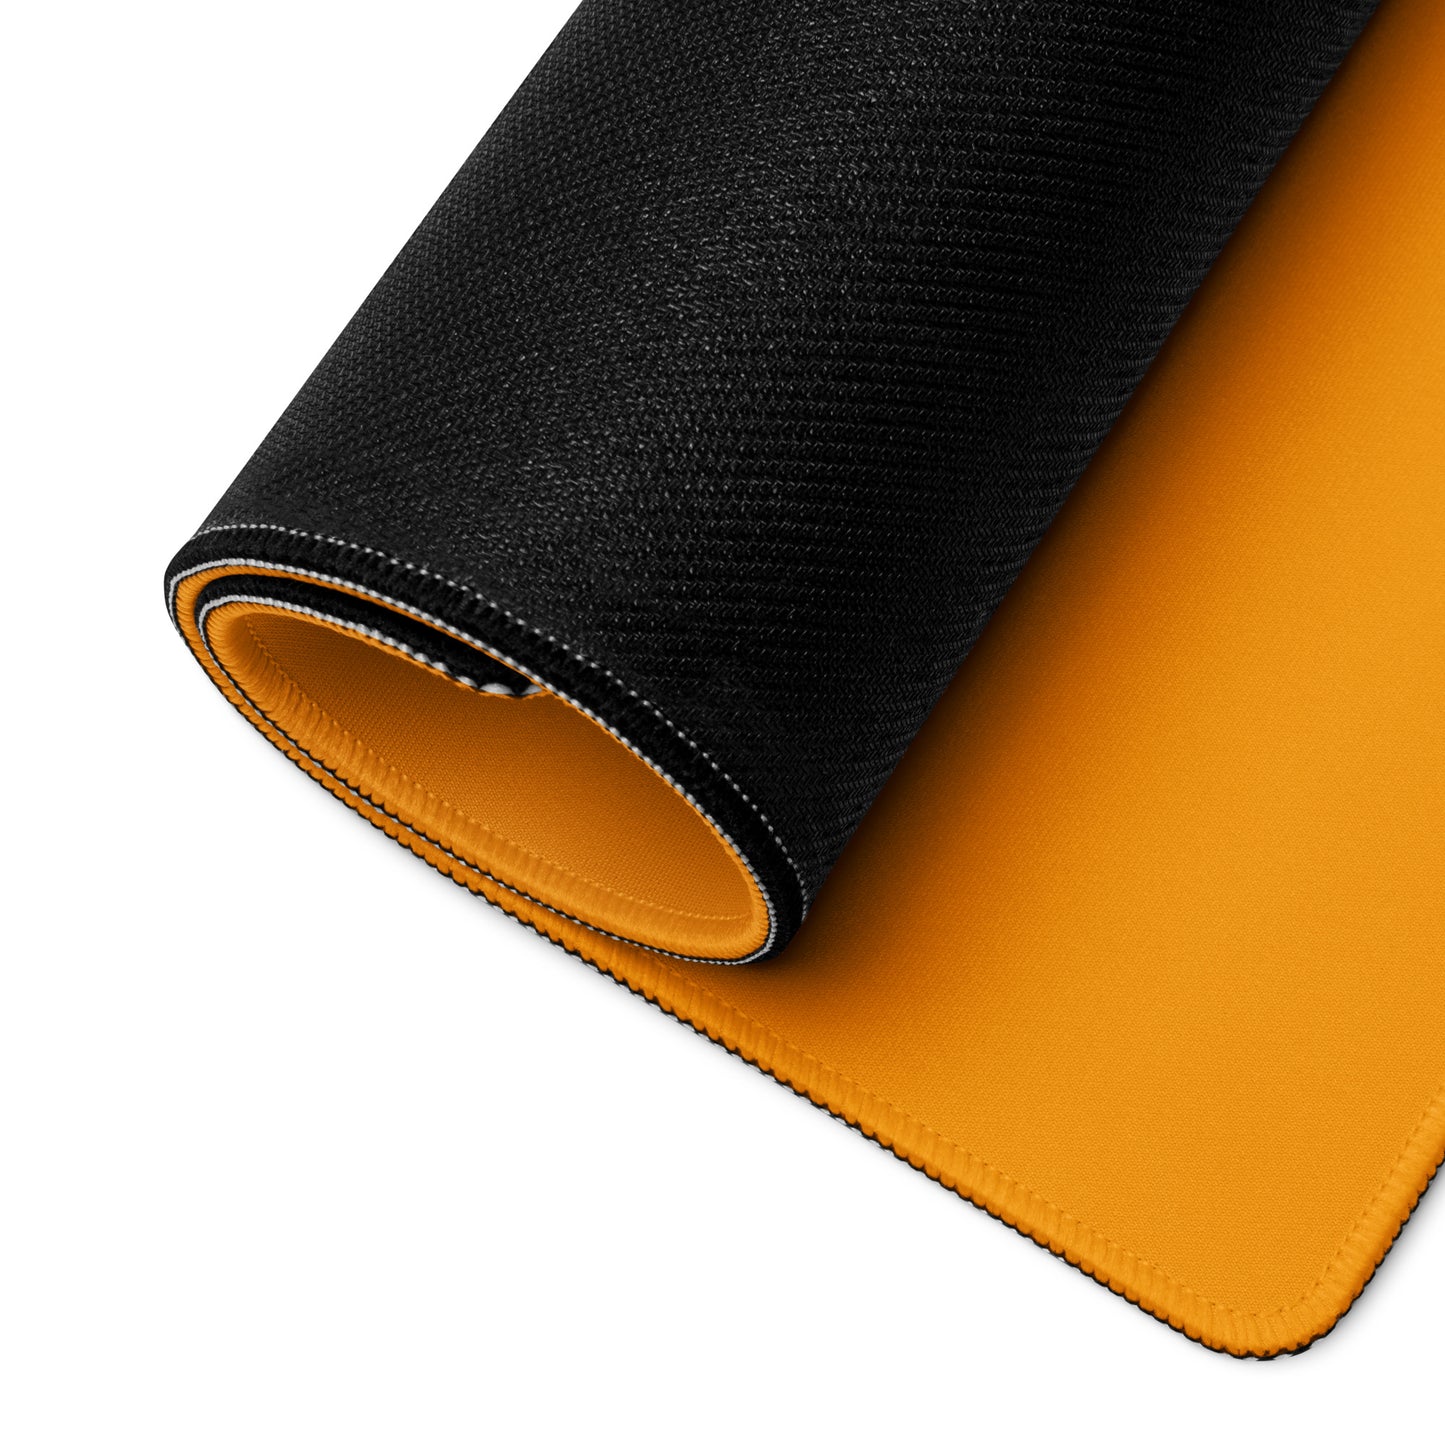 A desk pad with a futuristic race car displayed rolled up. Orange in color.